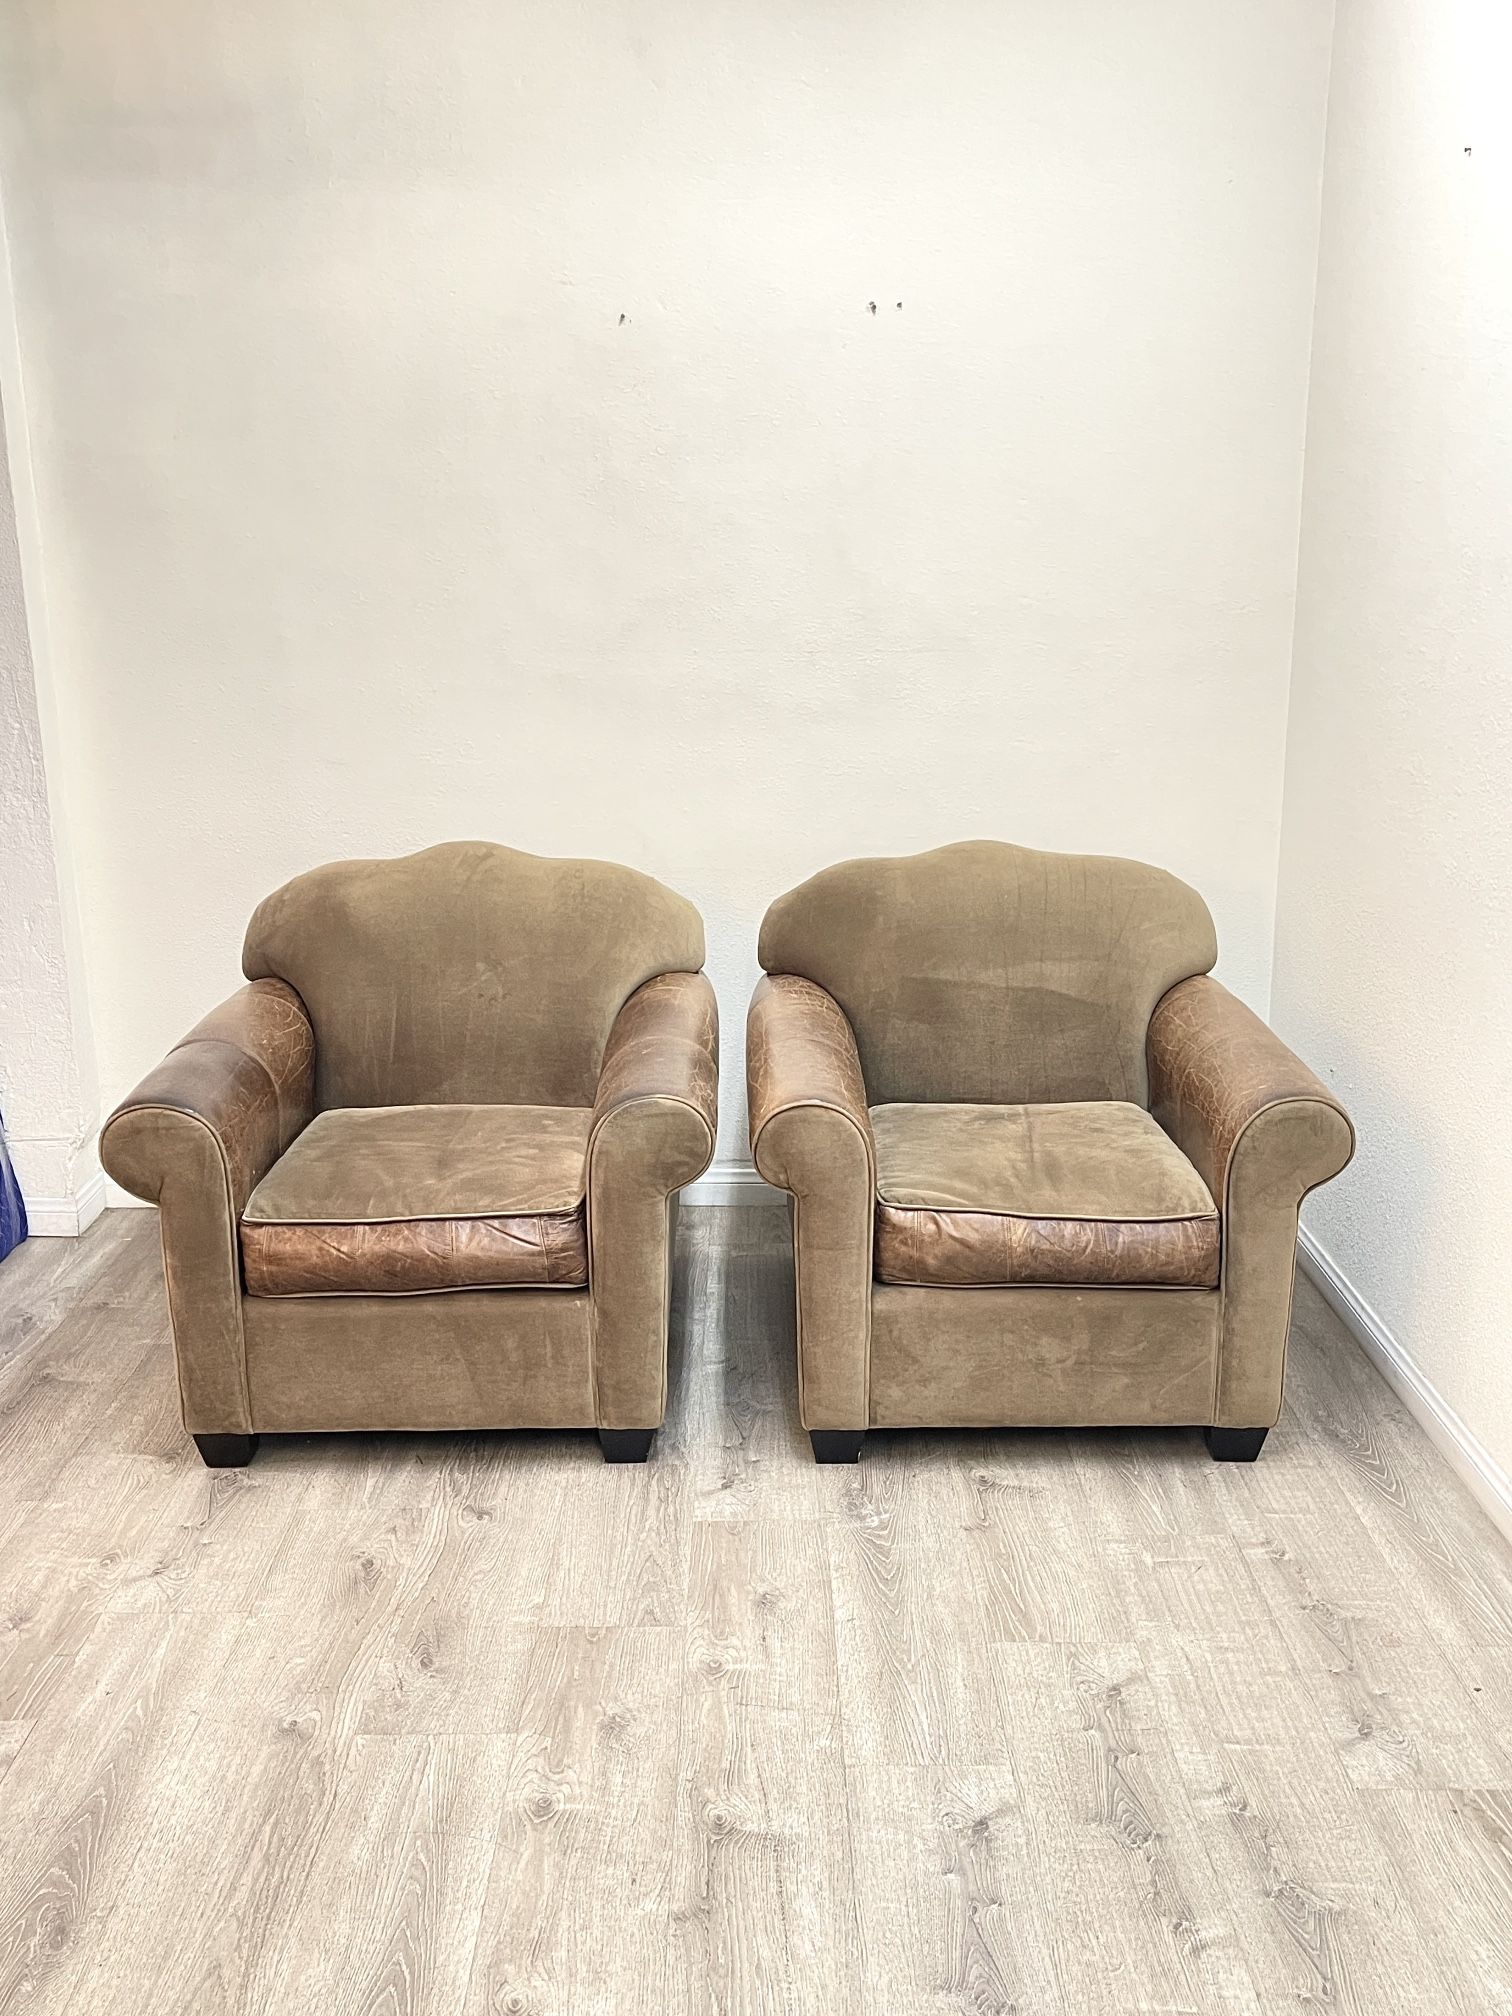 Pair Of Oversized Club Chairs 